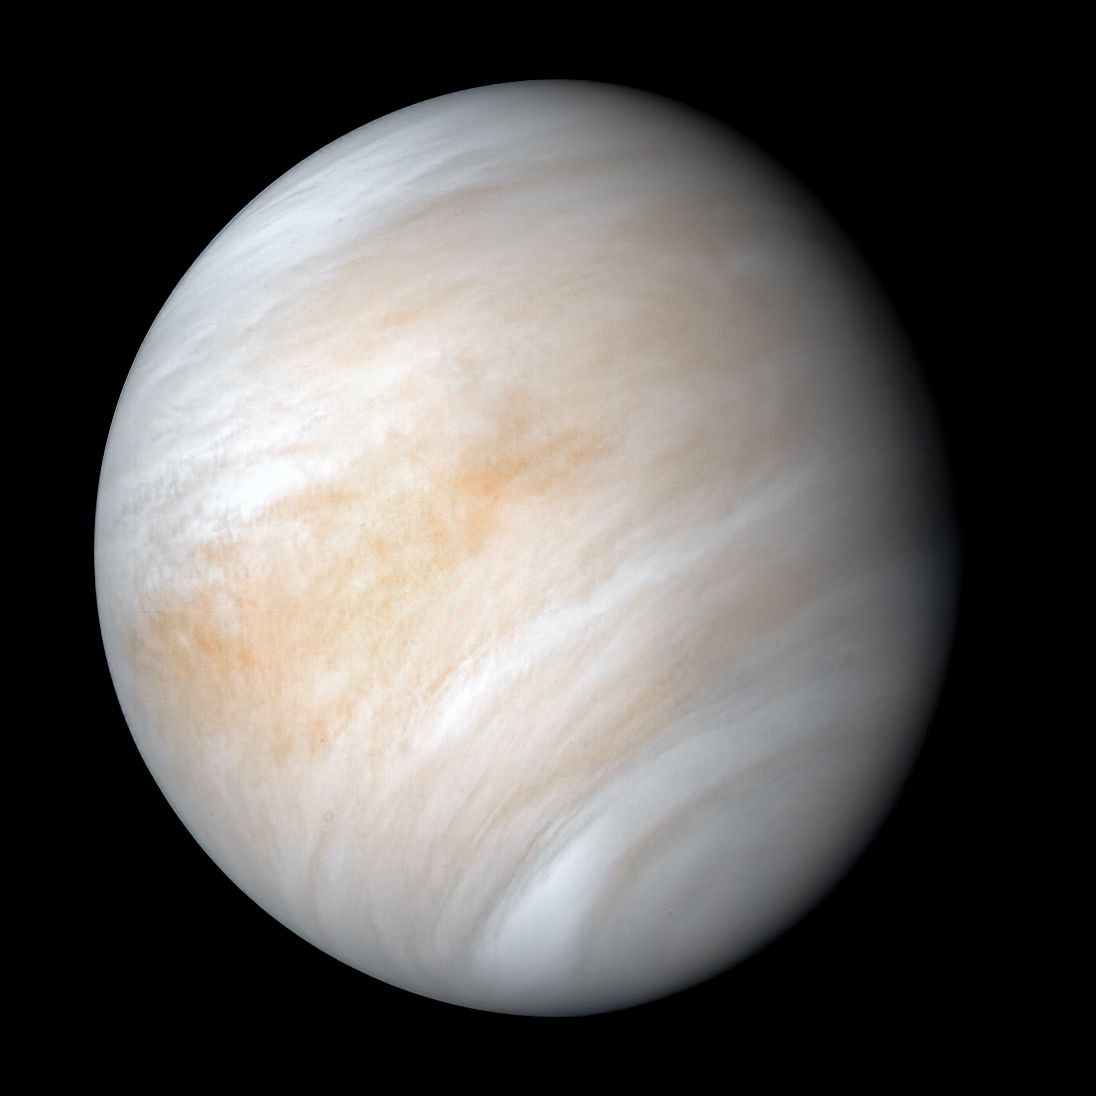 Cloud-swaddled Venus as seen from a spacecraft